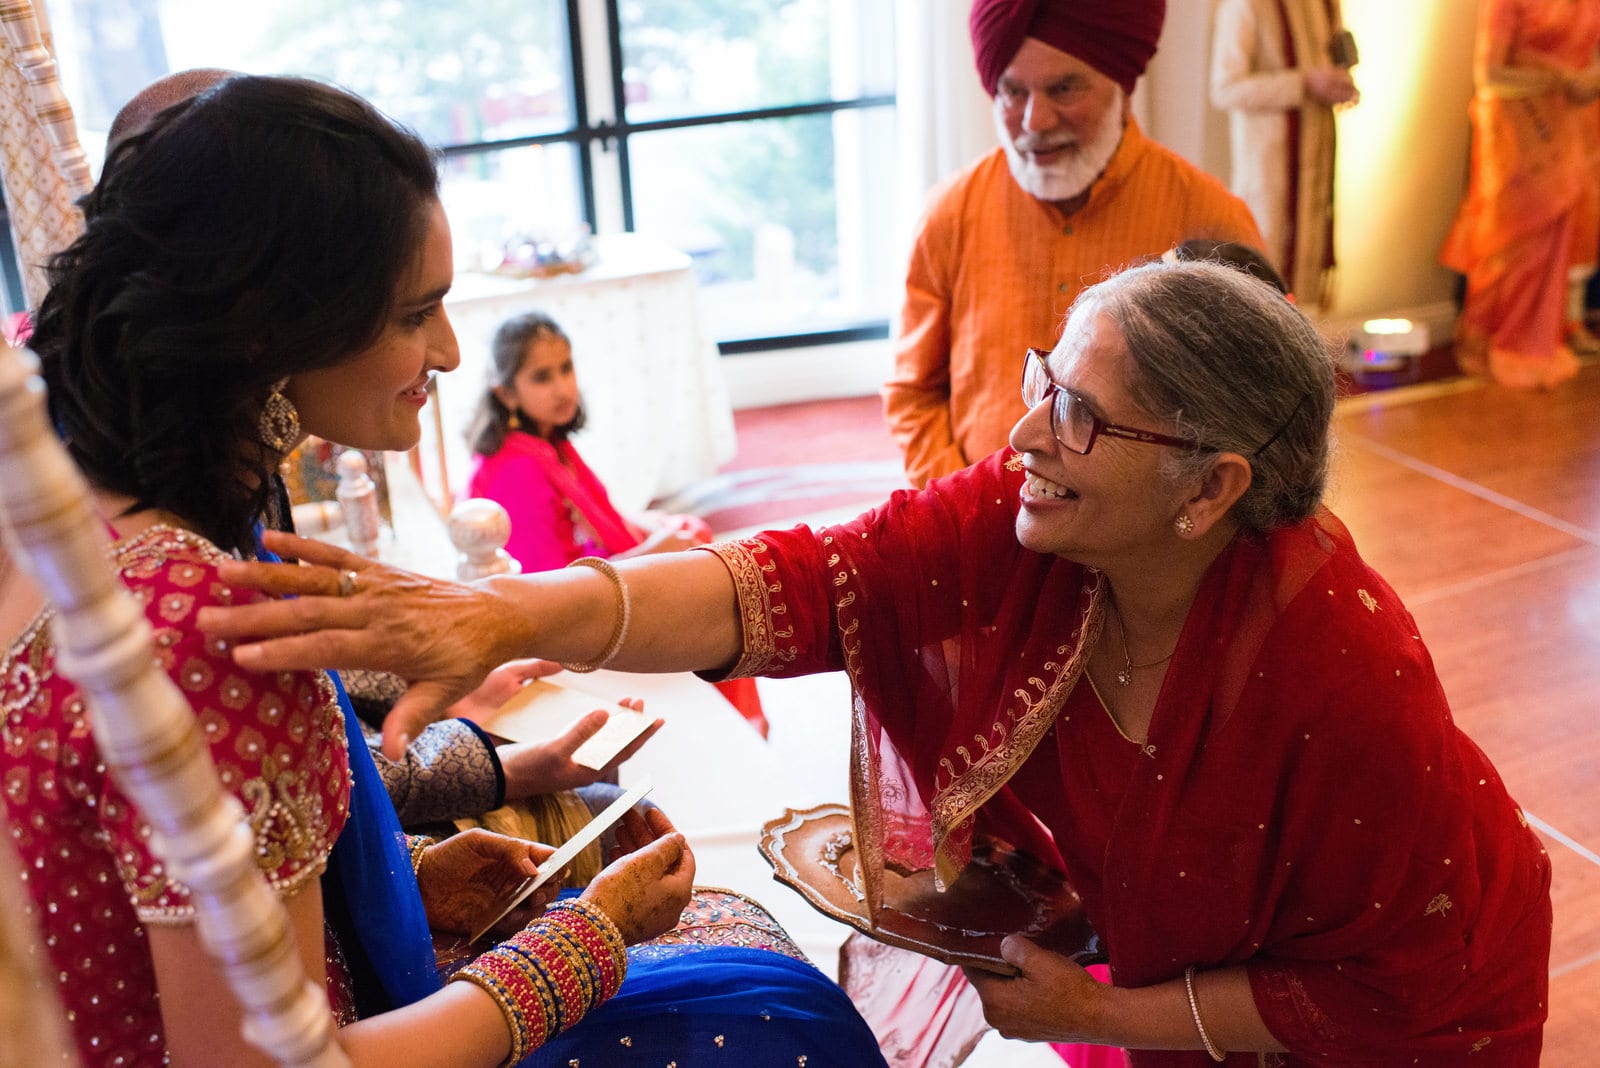 An elderly woman reaches out to bless the bride during her sangeet while a turbaned older man waits his turn behind during a Renaissance Phipps South Asian Wedding.